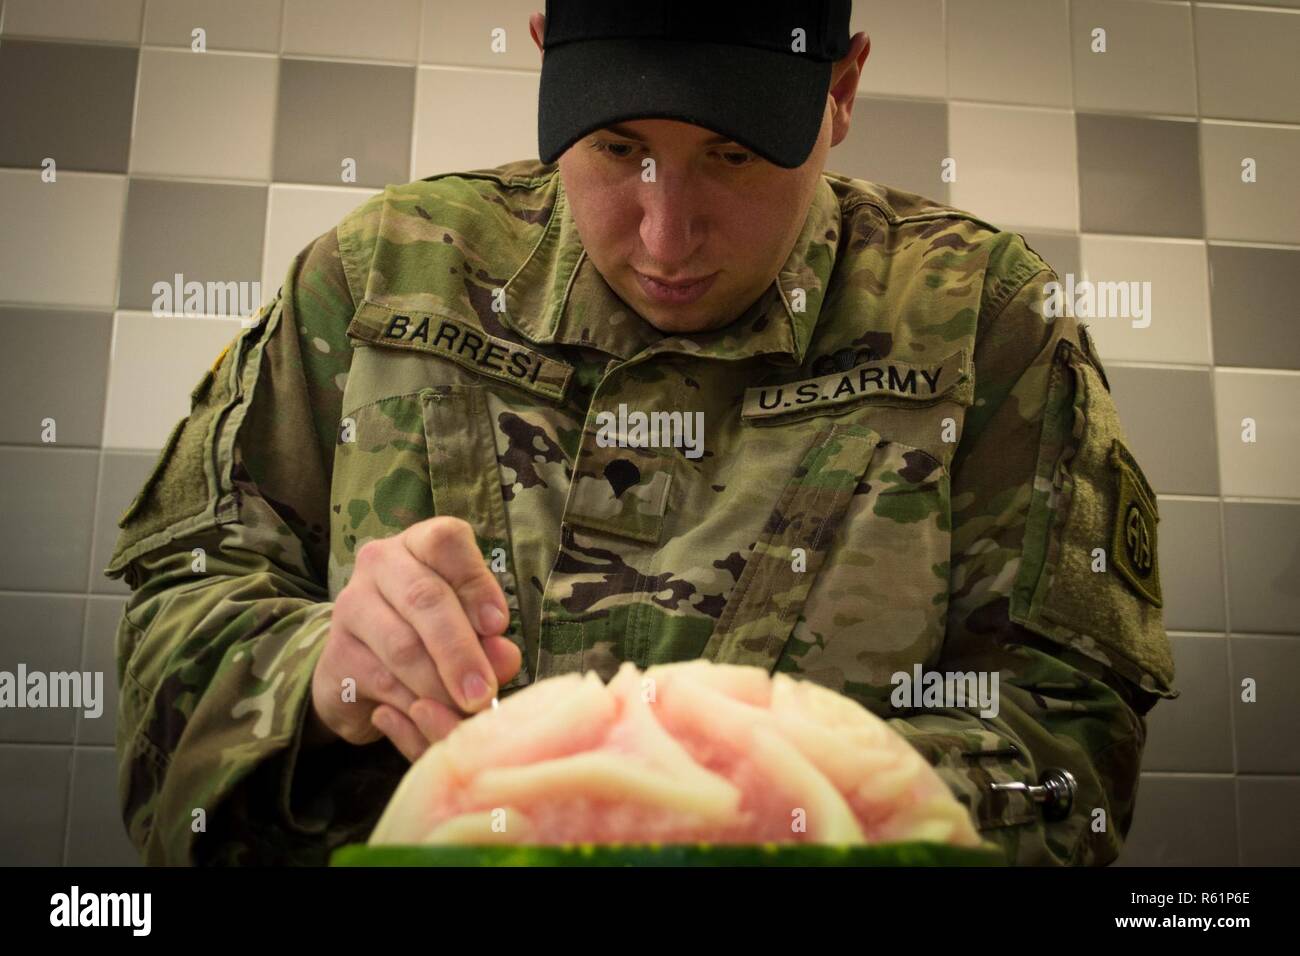 Spc. Phil Barresi, a Culinary Specialist assigned to the 82nd Brigade Support Battalion, 3rd Brigade Combat Team, 82nd Airborne Division uses an Exacto-Knife to carve watermelon to be used as a garnish Monday, November 19, 2018 at the brigade’s dining facility.      Barresi and other Culinary Specialists from the battalion spent entire night preparing over 640 lbs. of turkey, 558 lbs. of steamship round, 72 lbs. of shrimp, more than 100 pies, approximately 700 servings of sweet potatoes and approximately 800 servings of green bean casserole to serve during the brigade’s Thanksgiving feast the  Stock Photo